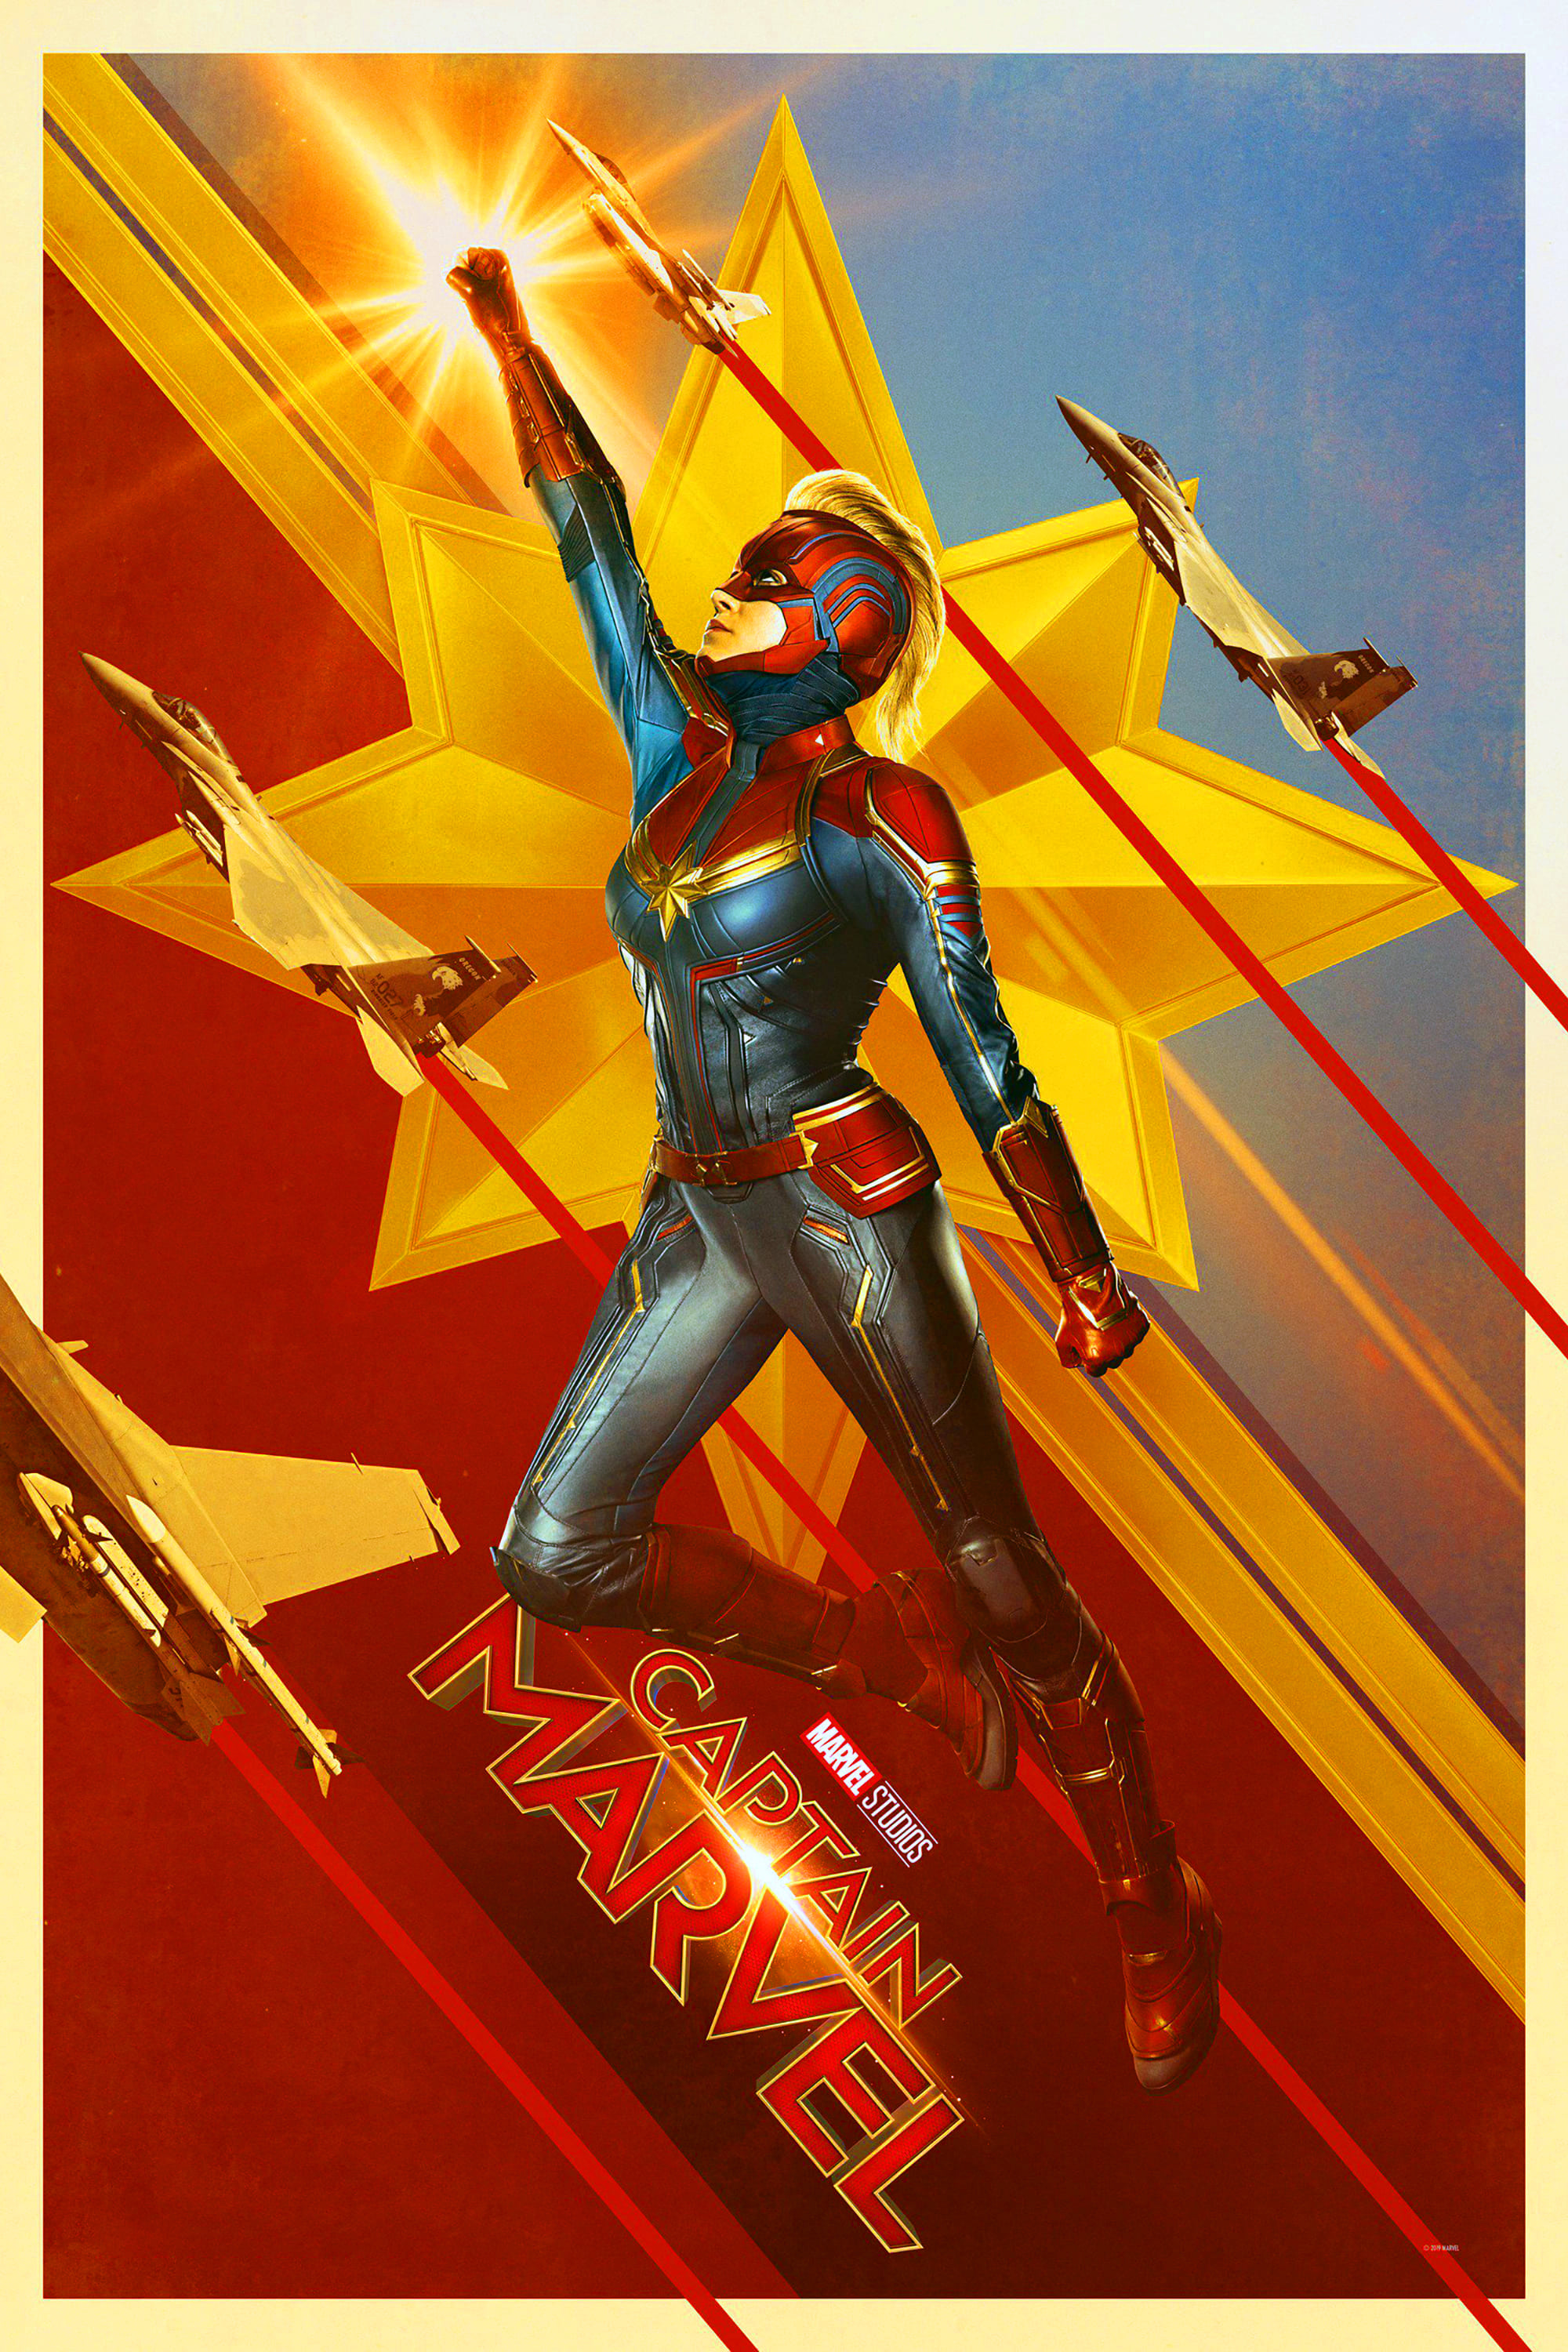 Captain Marvel 2019 Movie Official Poster Wallpapers